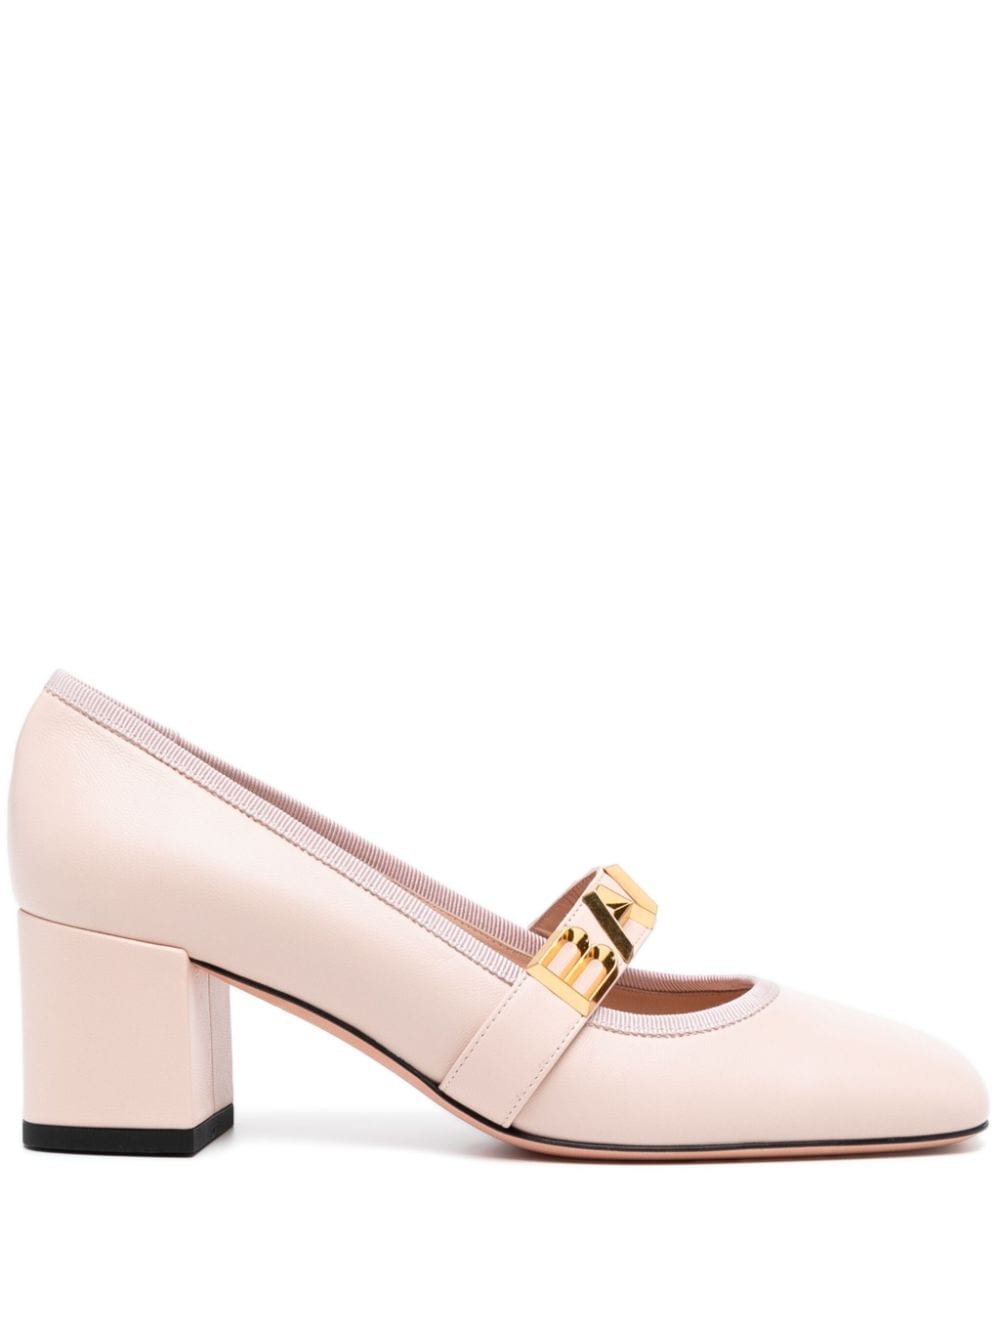 Bally Spell 55mm lettering-detail leather pumps - Pink von Bally